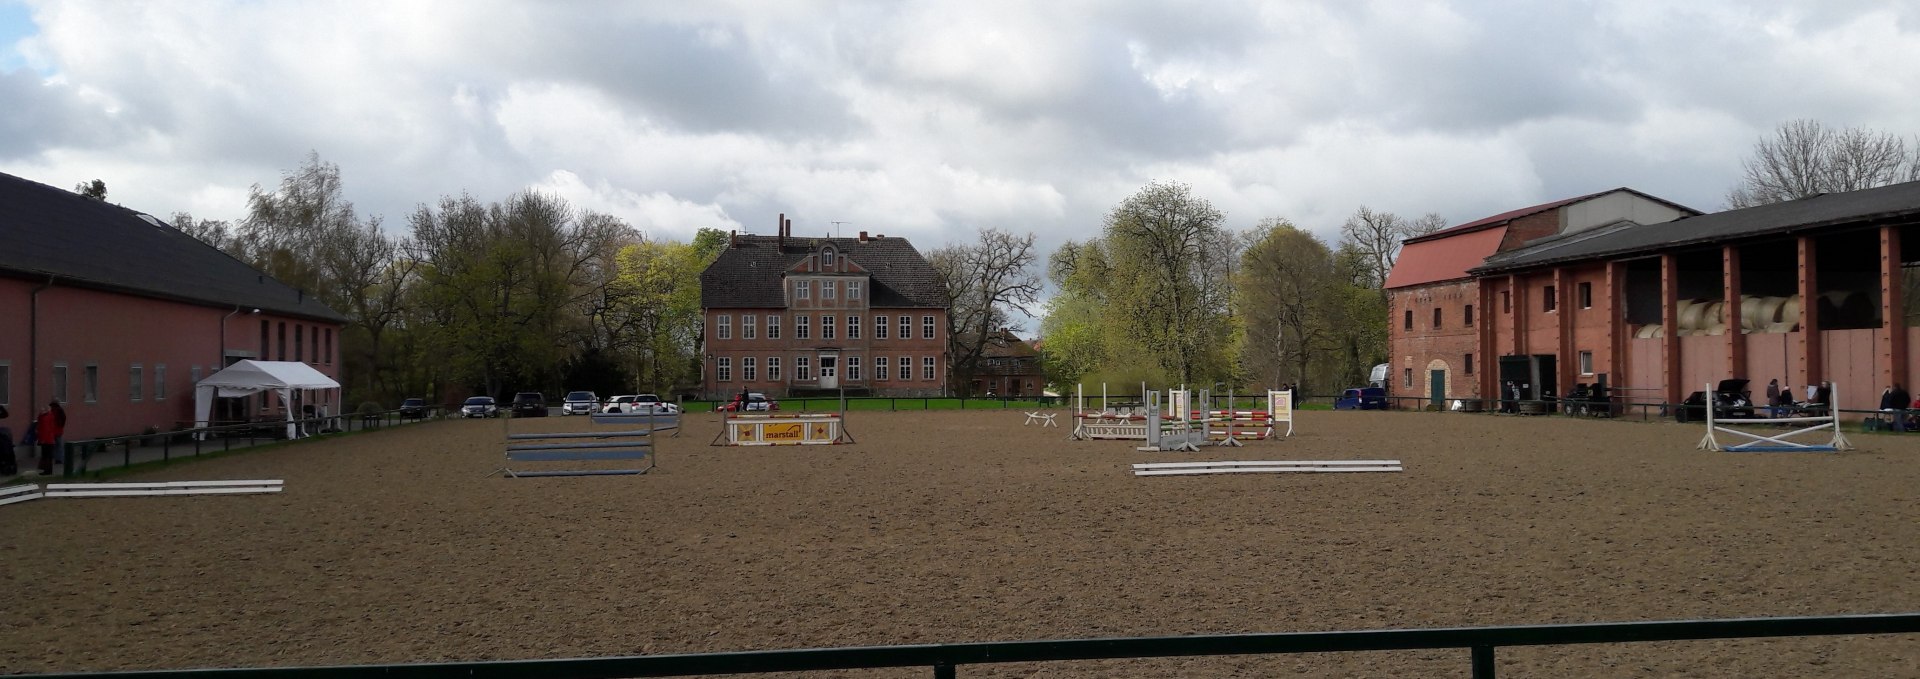 Riding facility around the manor house Reez, © Sphinx ET